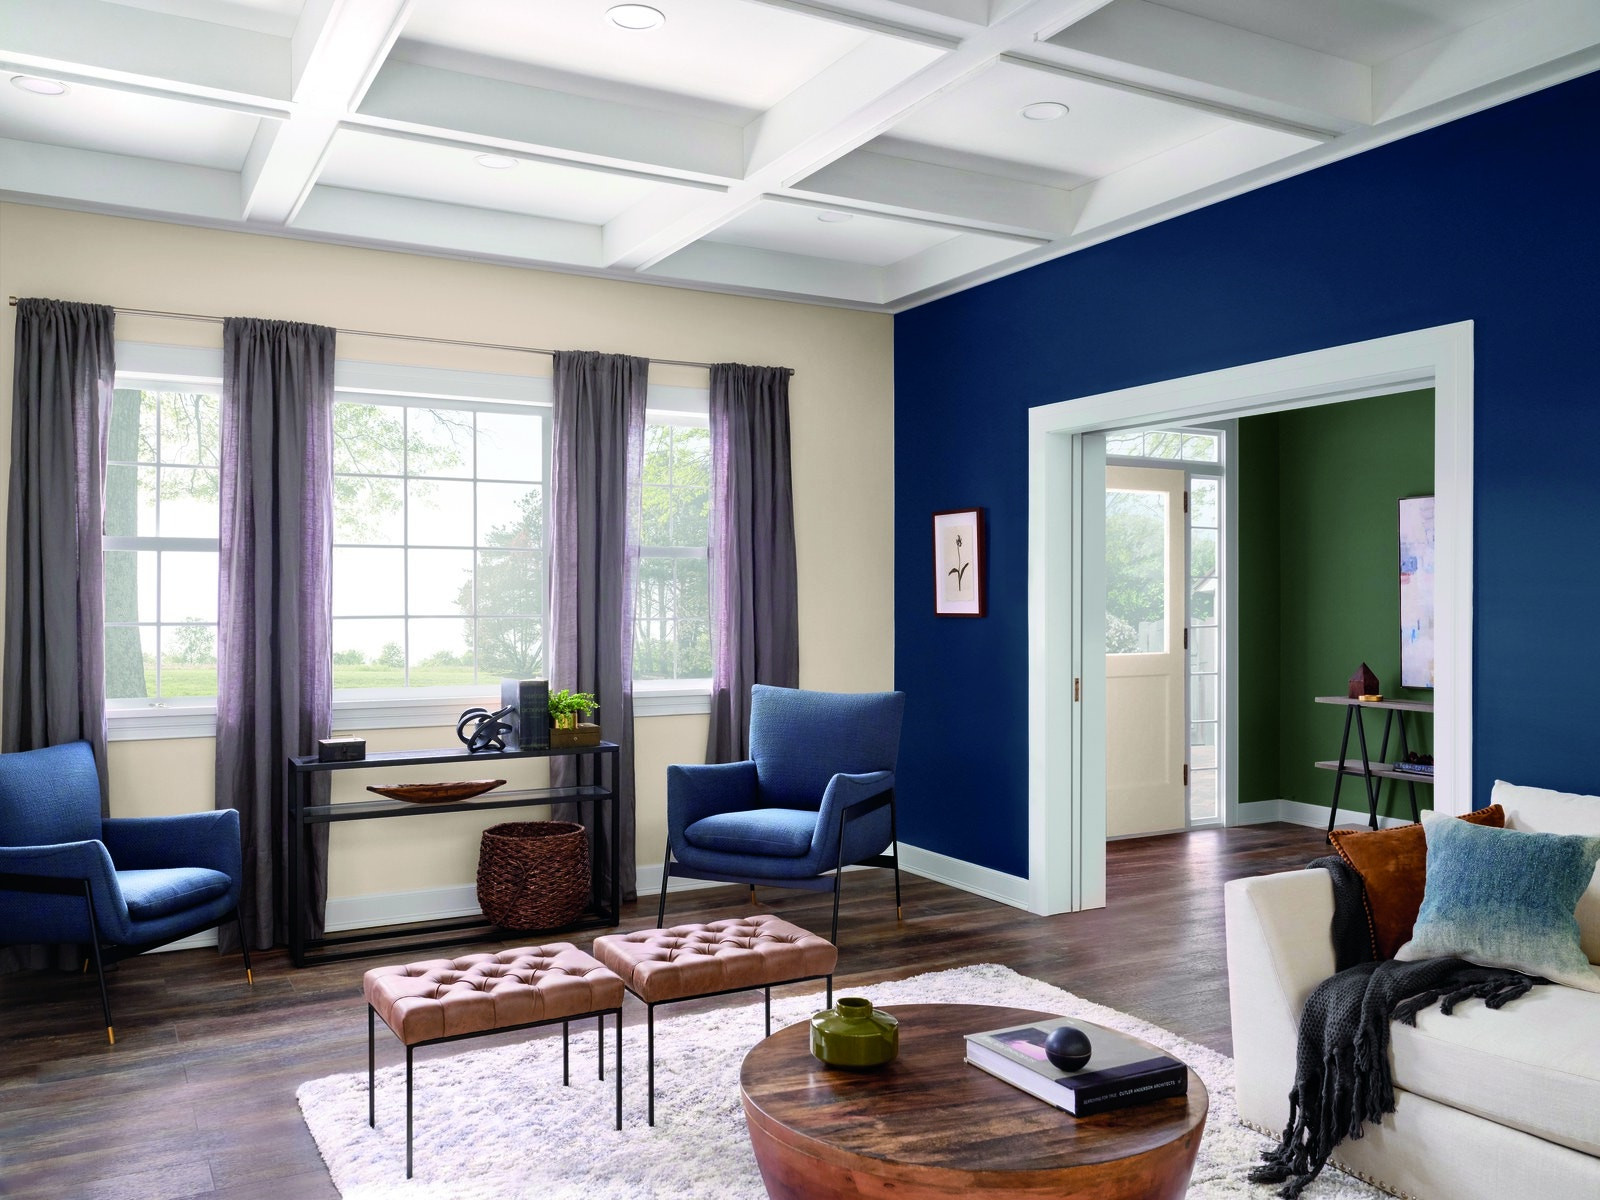 Living Room Paint Ideas 2020
 The Color Trends We’ll Be Seeing in 2020 According to